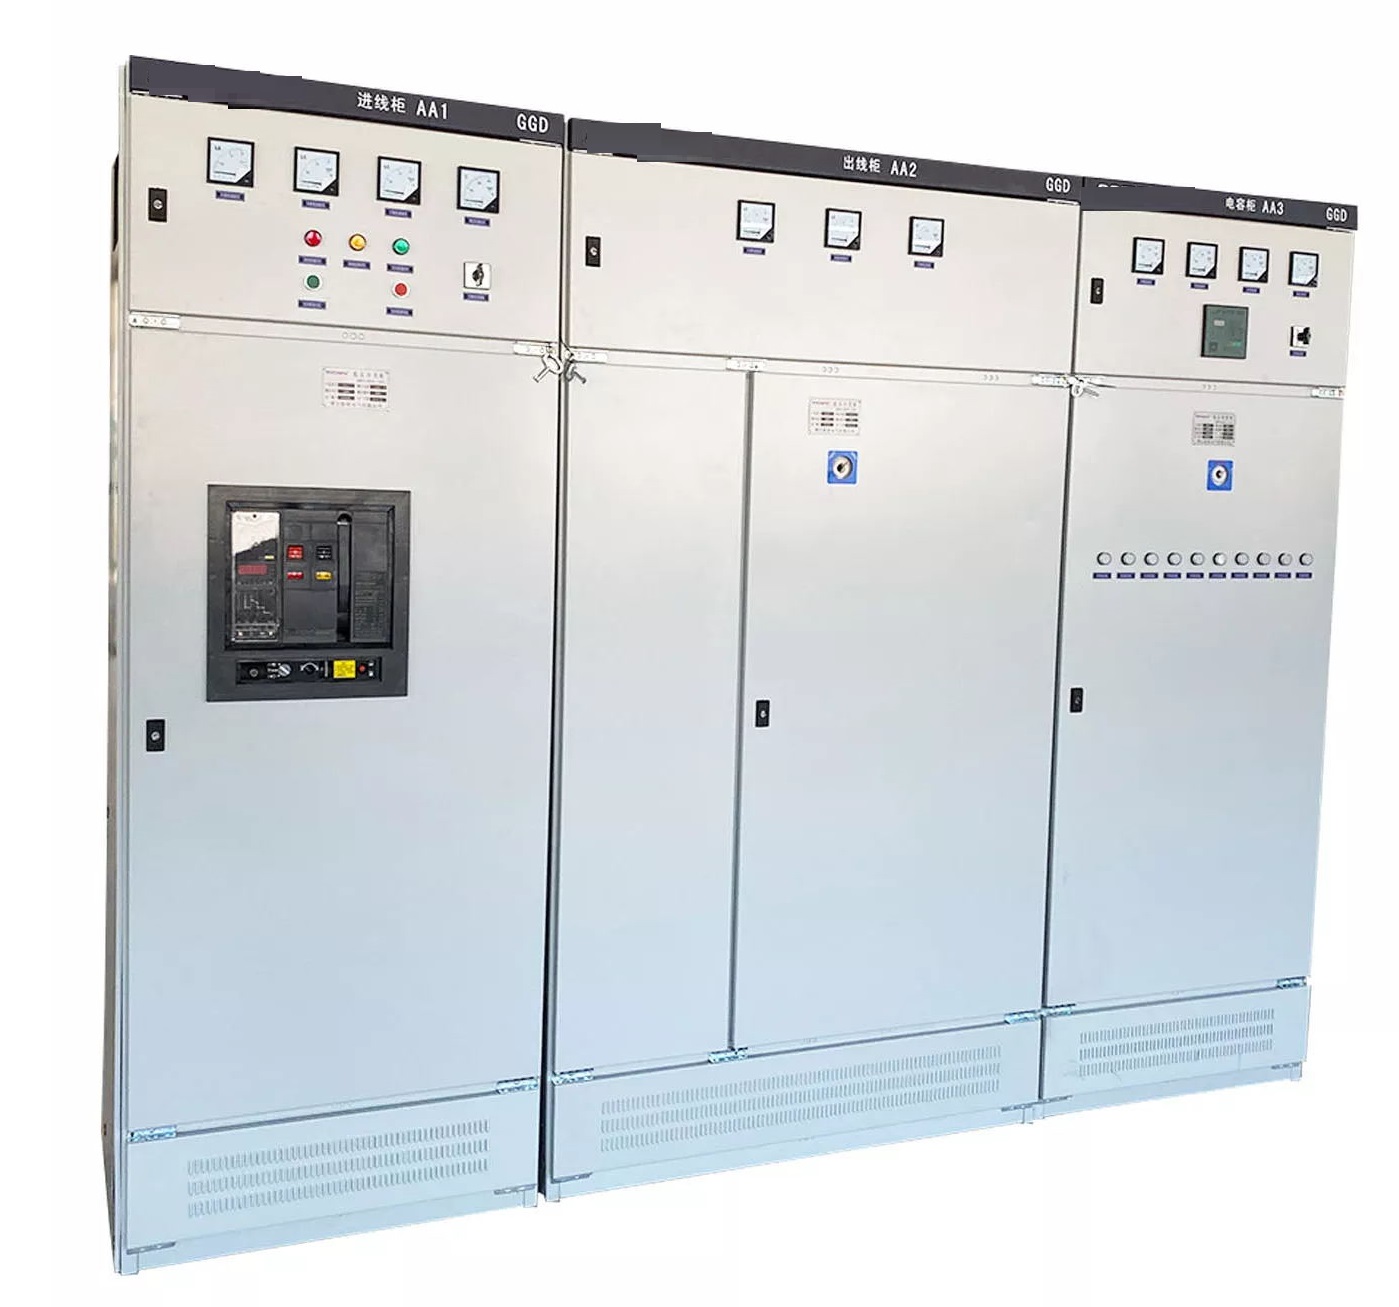 400V GGD Low Voltage Air circuit breaker incoming Switchgear with MCCB PFI power capacitor output panel